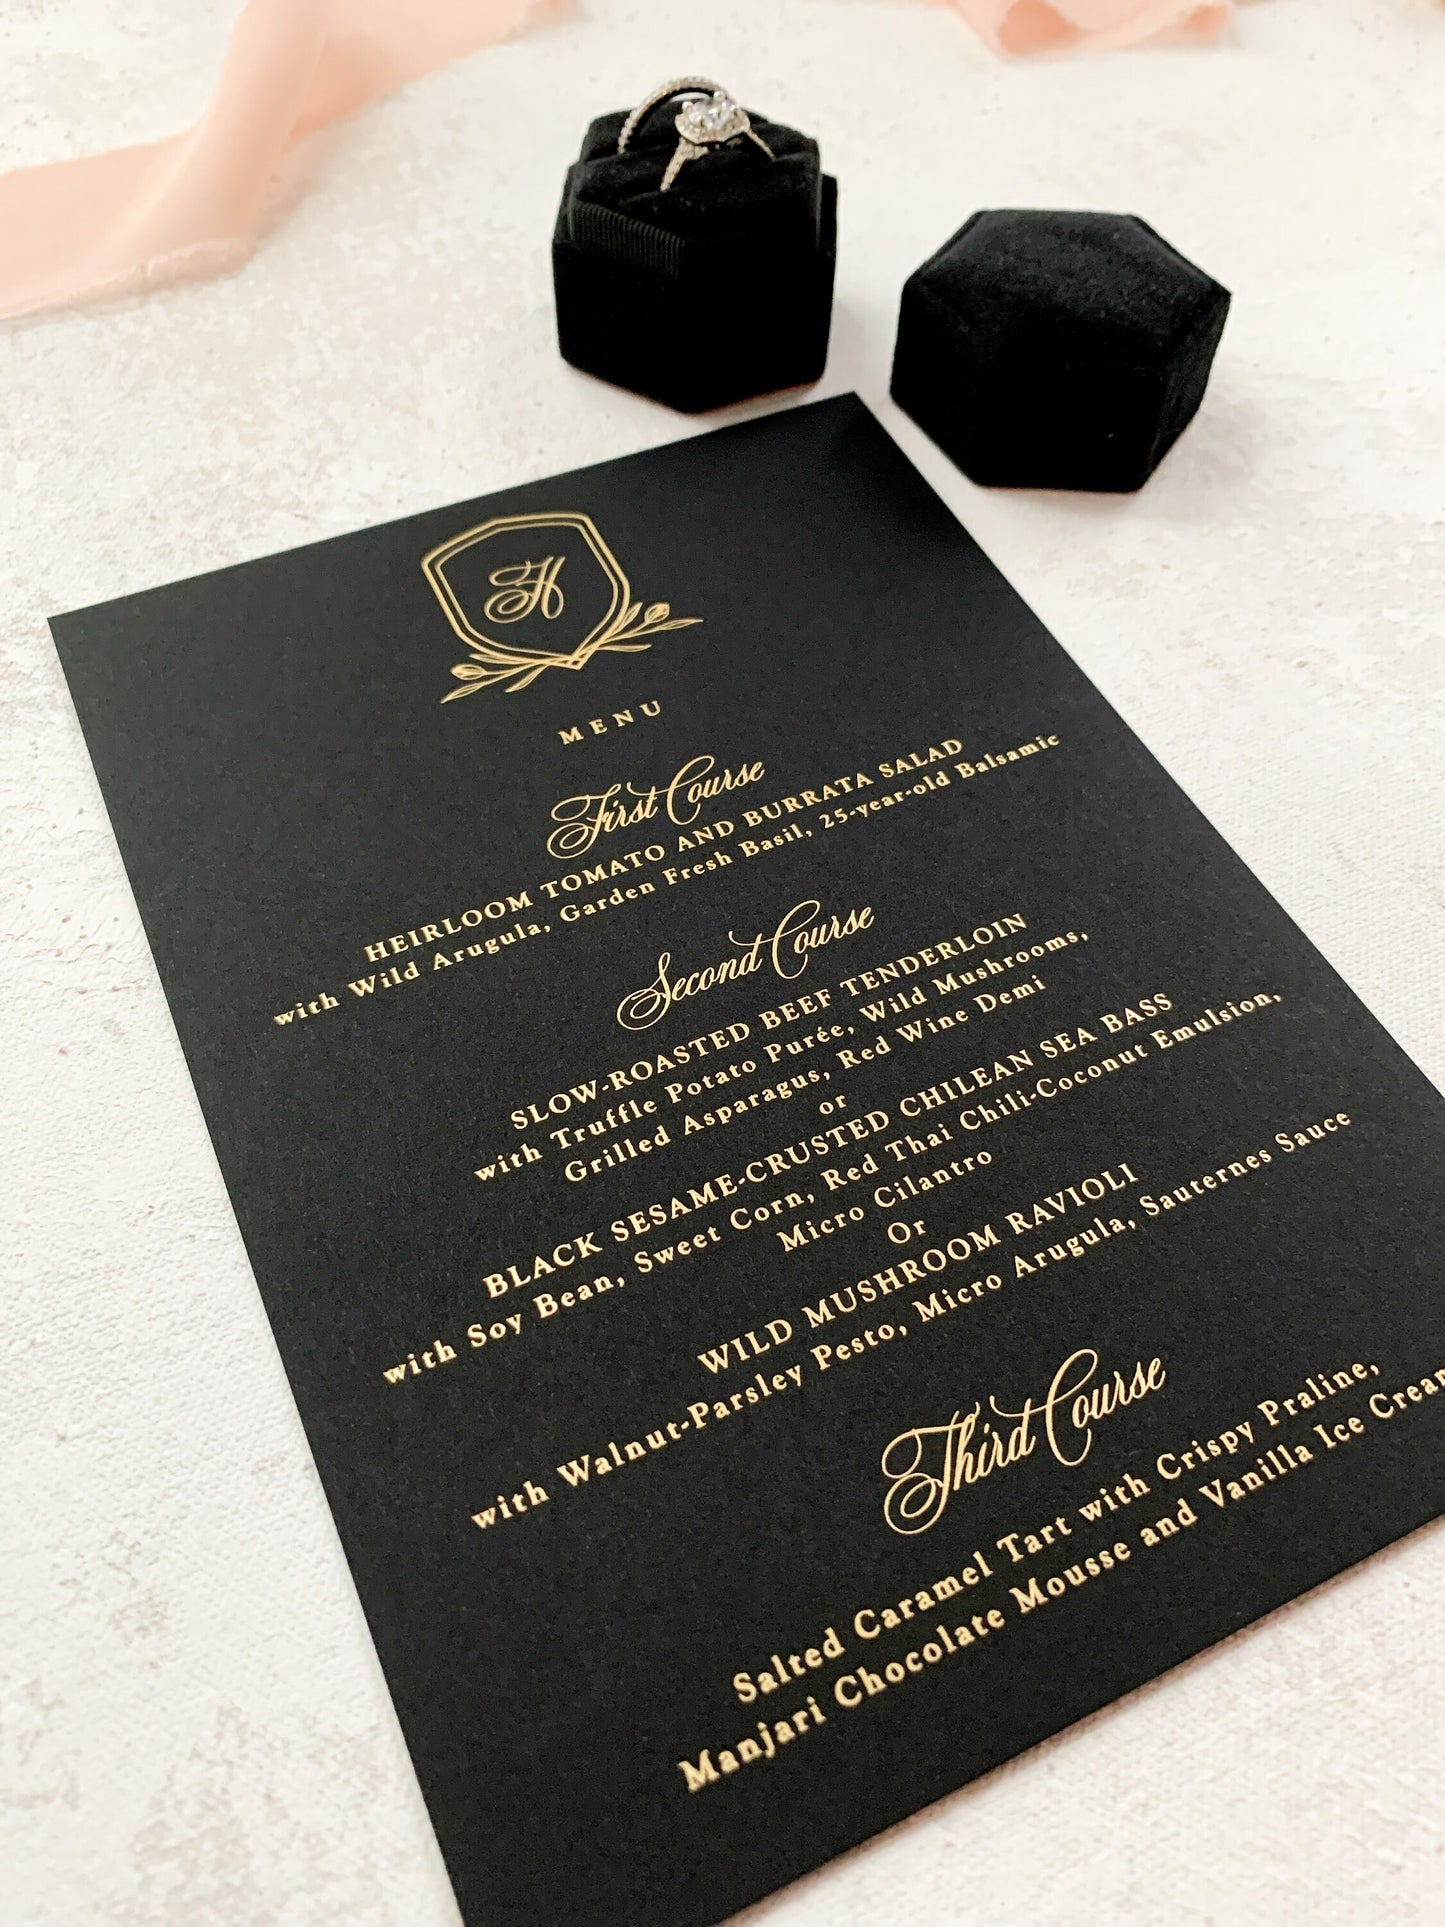 Black and Gold Wedding Menu with Foil | Any color Style 01 - Black Bird